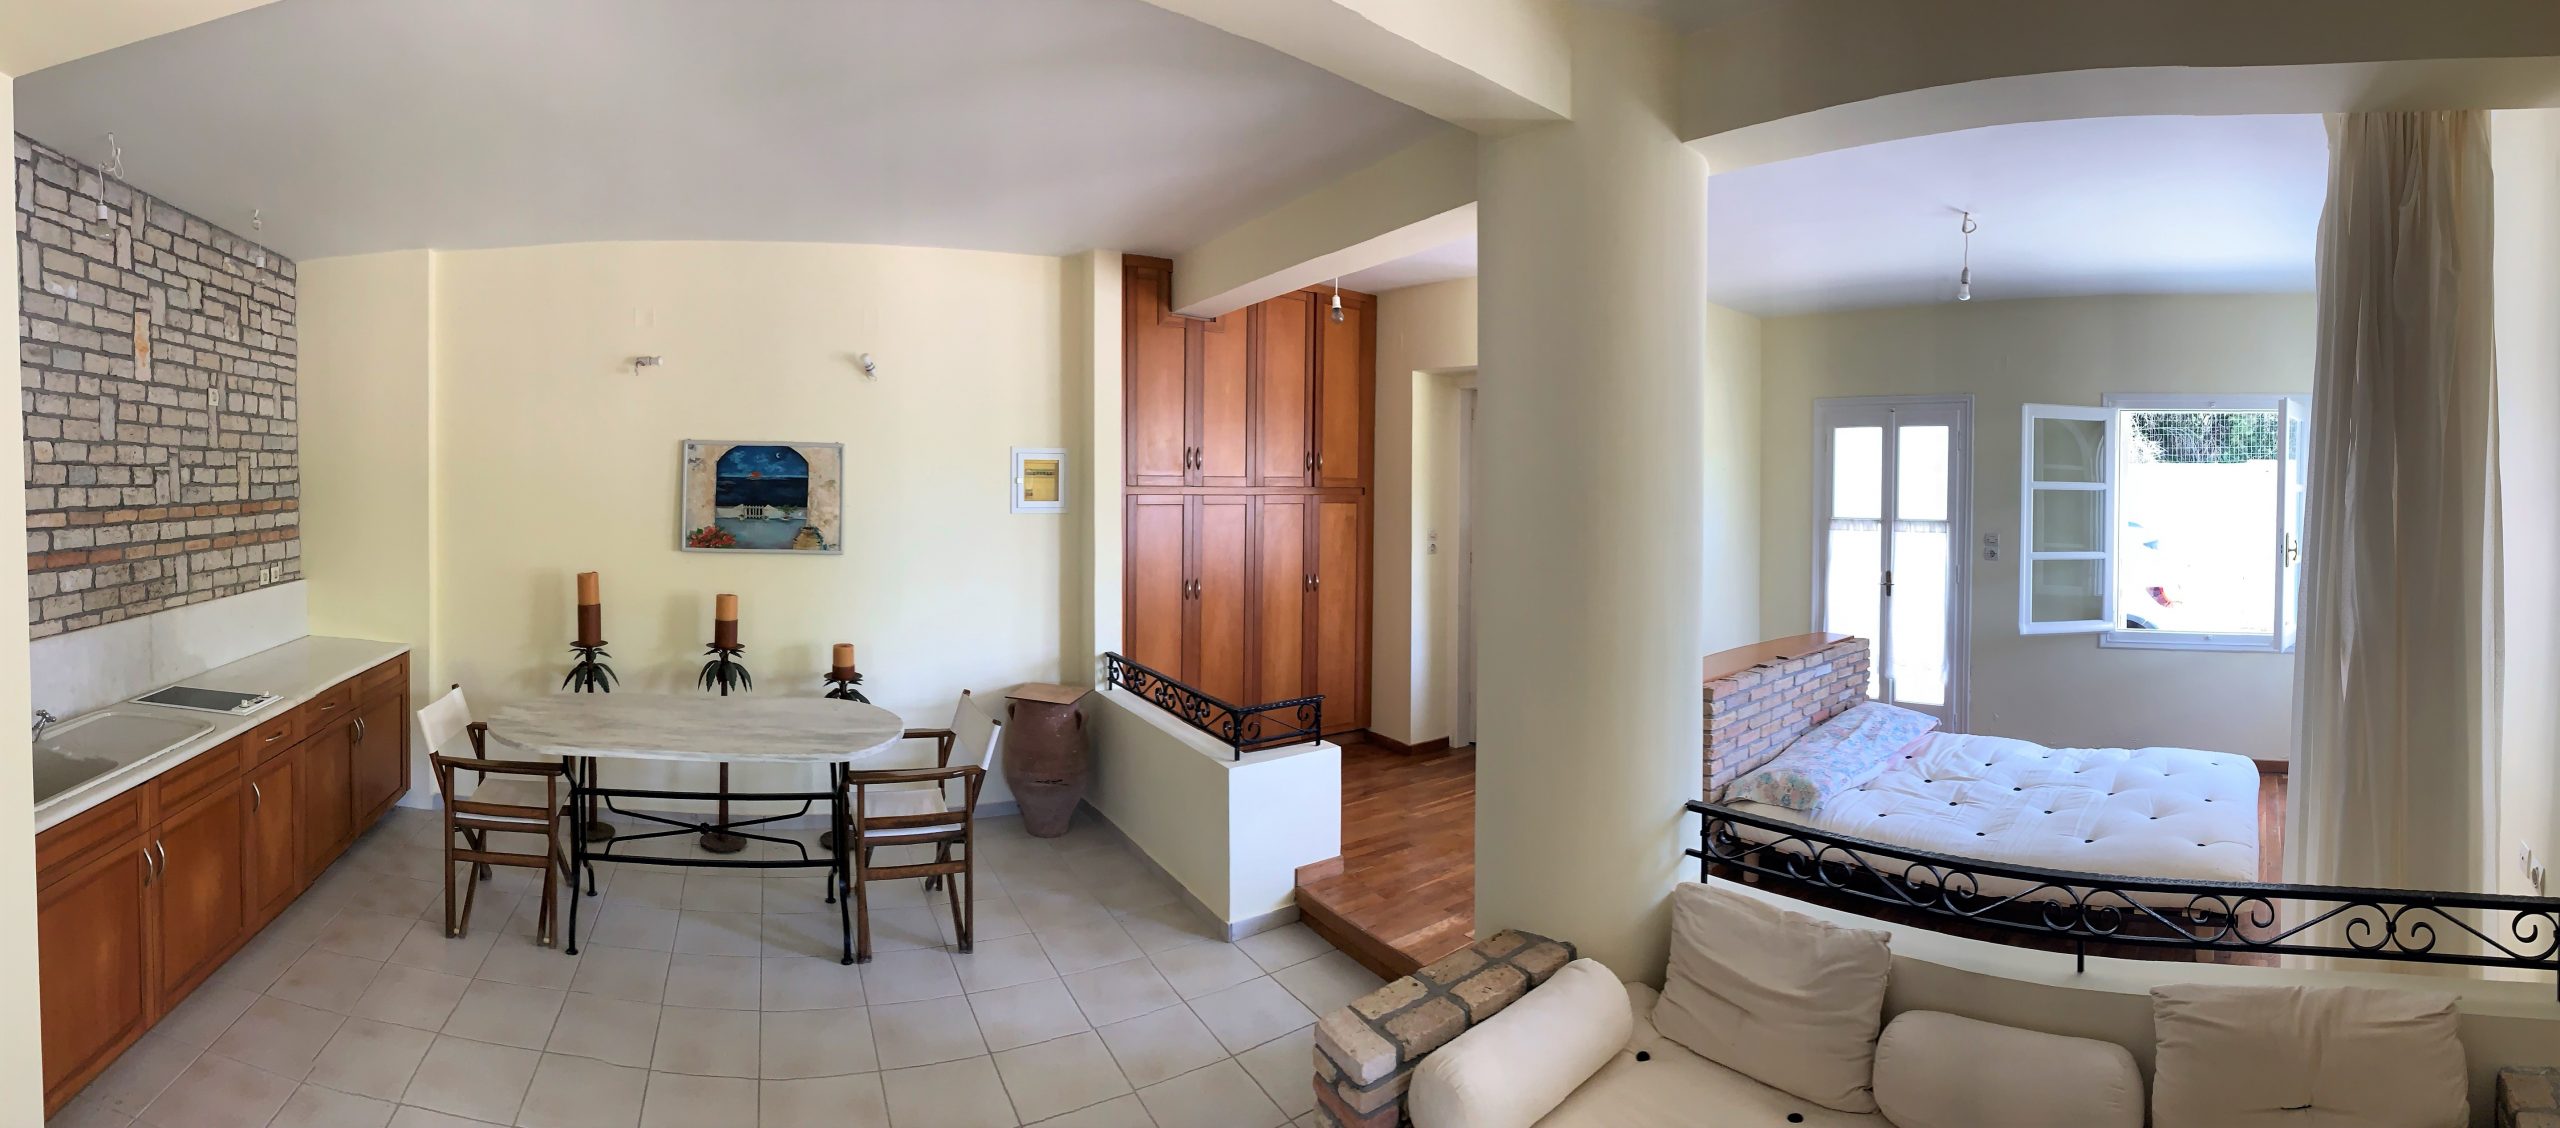 Interiors of house for sale Ithaca Greece, Aetos